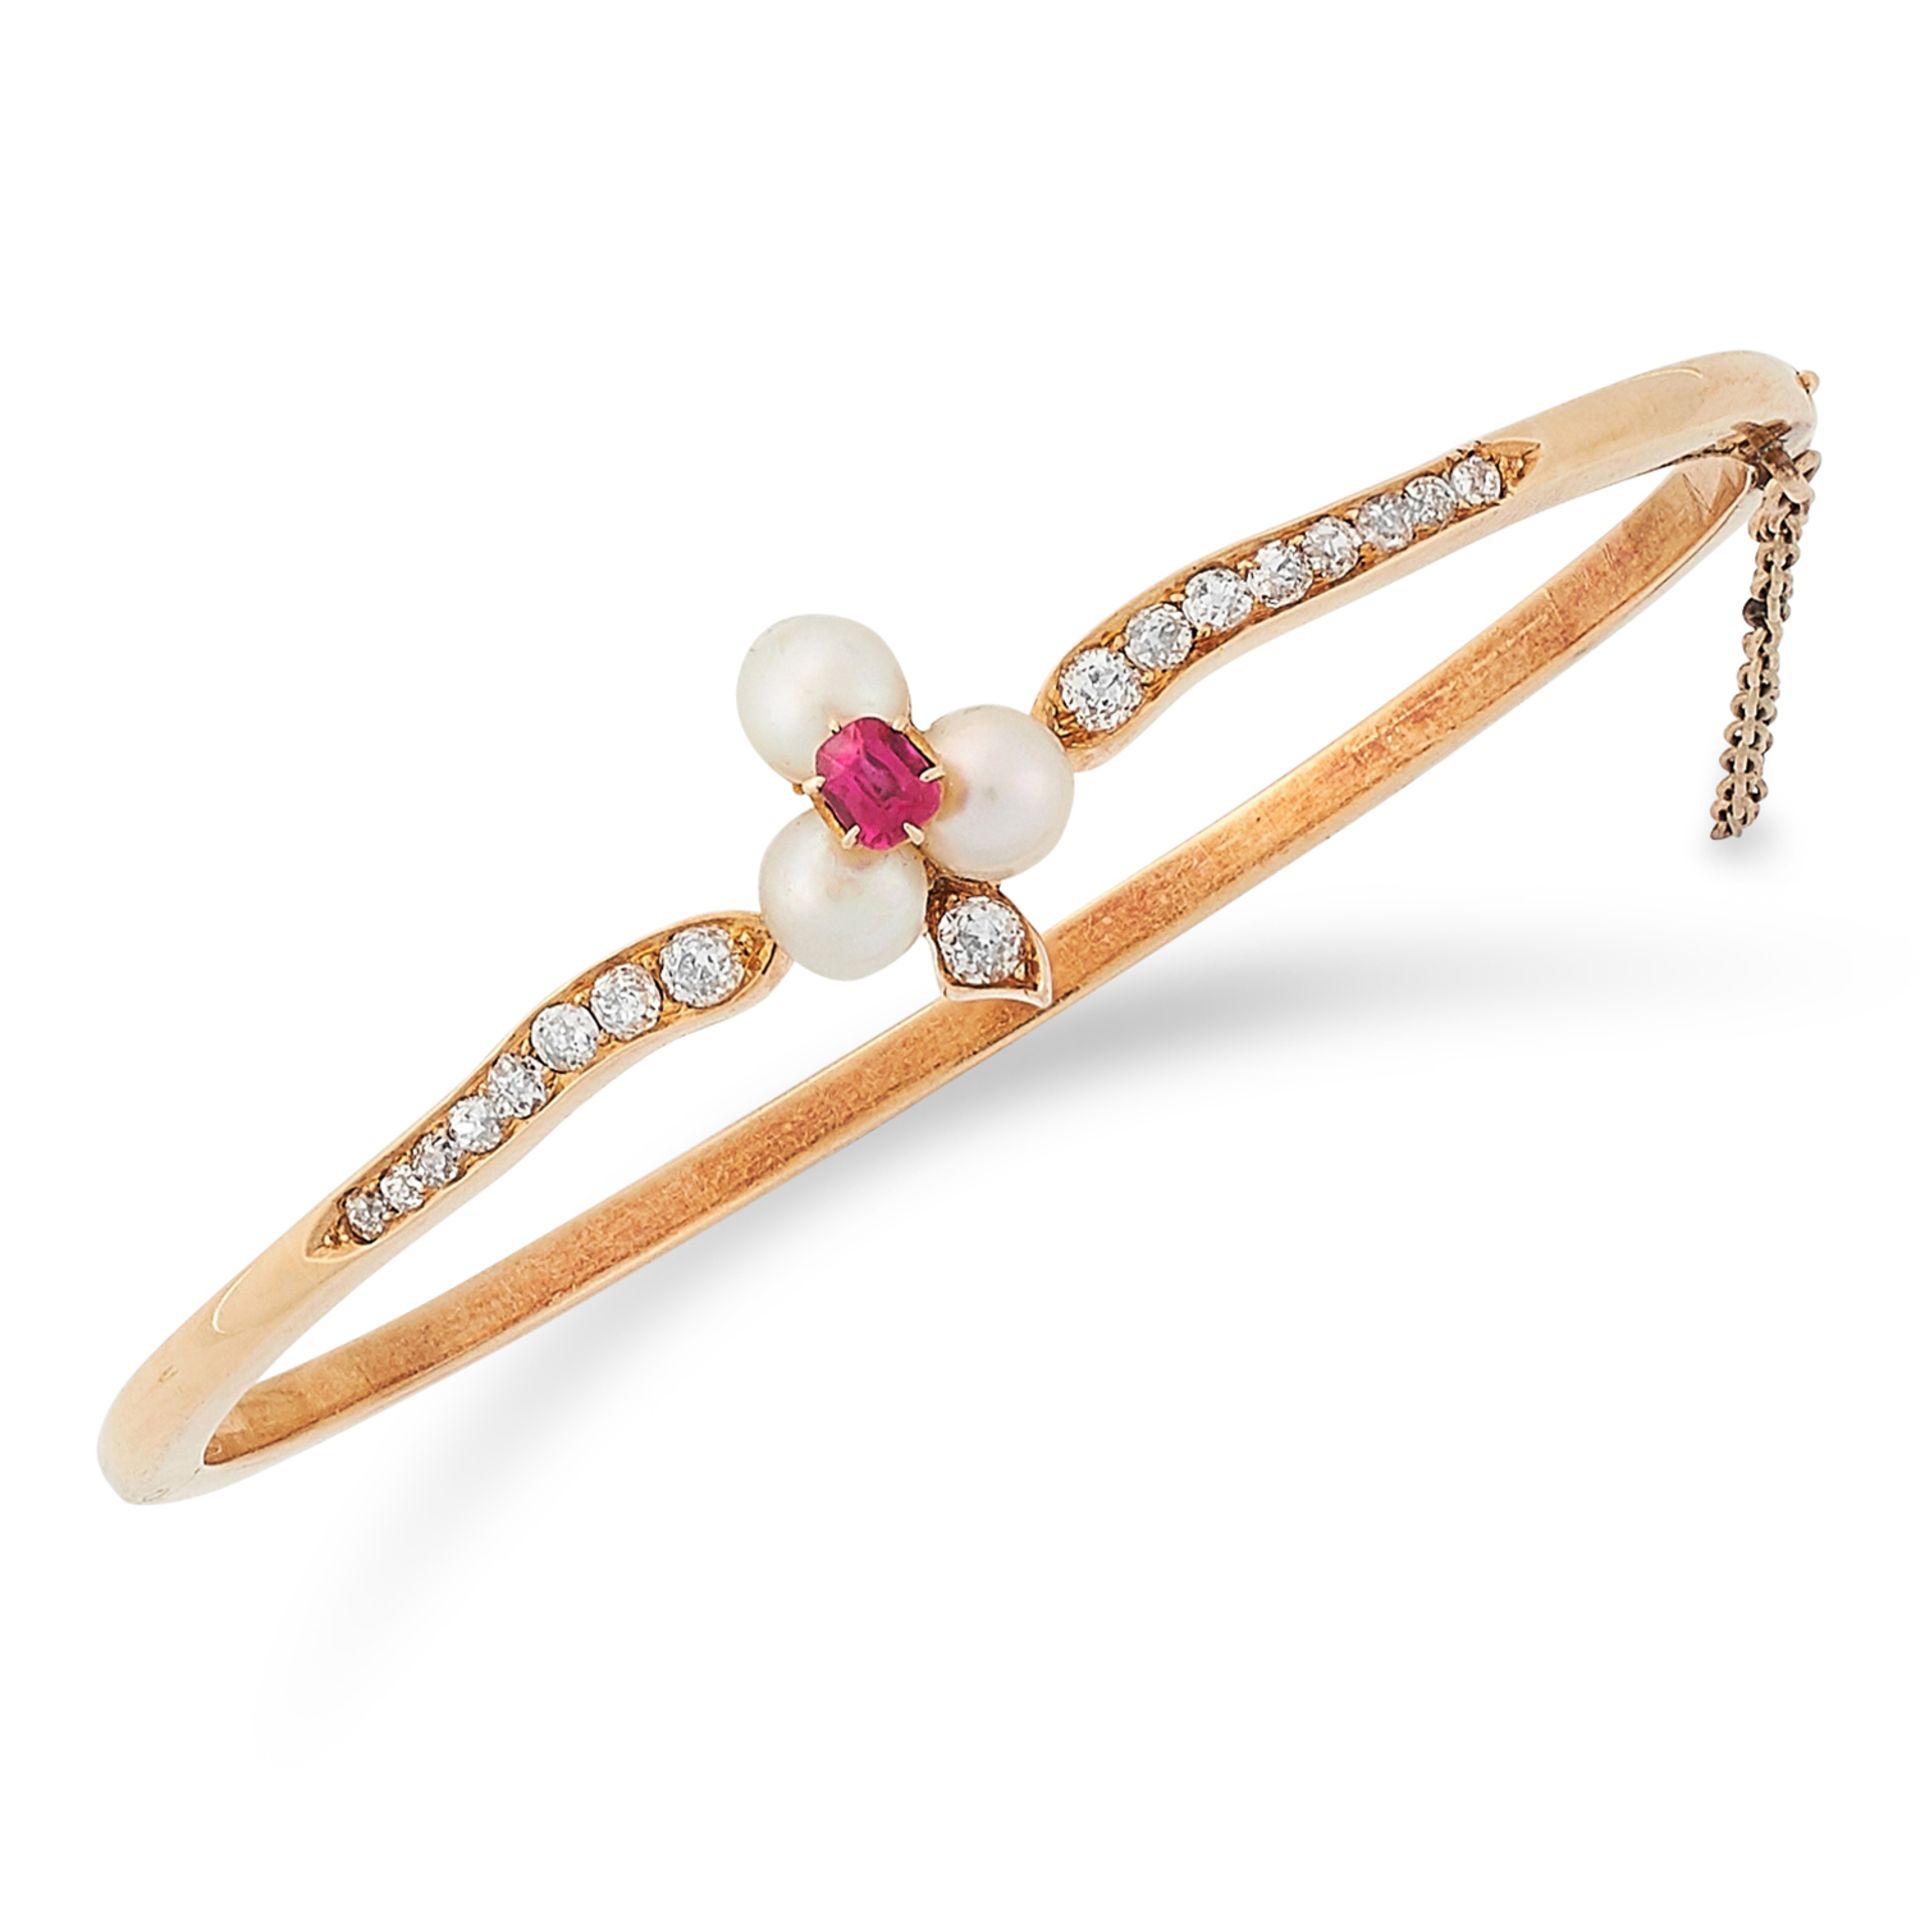 RUBY, DIAMOND AND PEARL BANGLE set with pearls, cushion cut ruby and round cut diamonds, 6cm inner